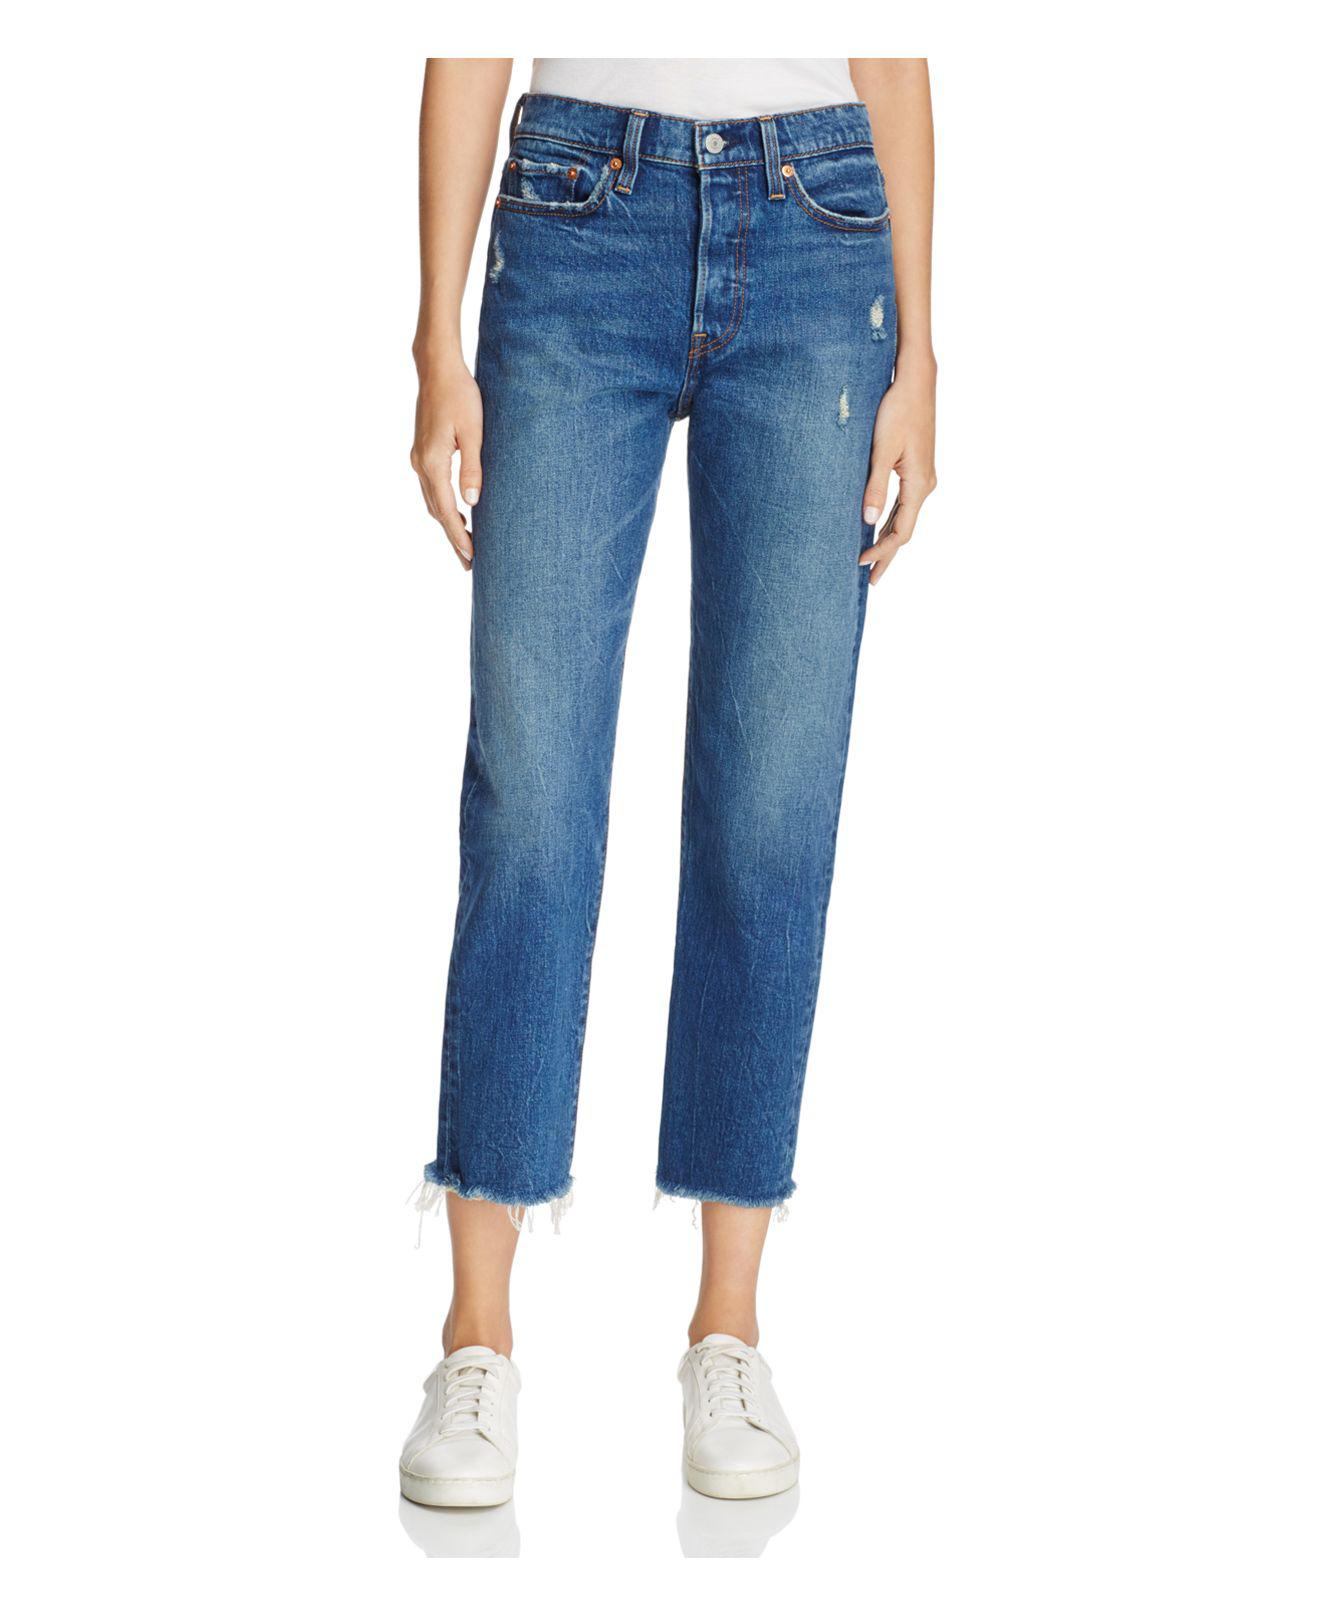 Lyst - Levi'S Wedgie Straight Jeans In Lasting Impression in Blue